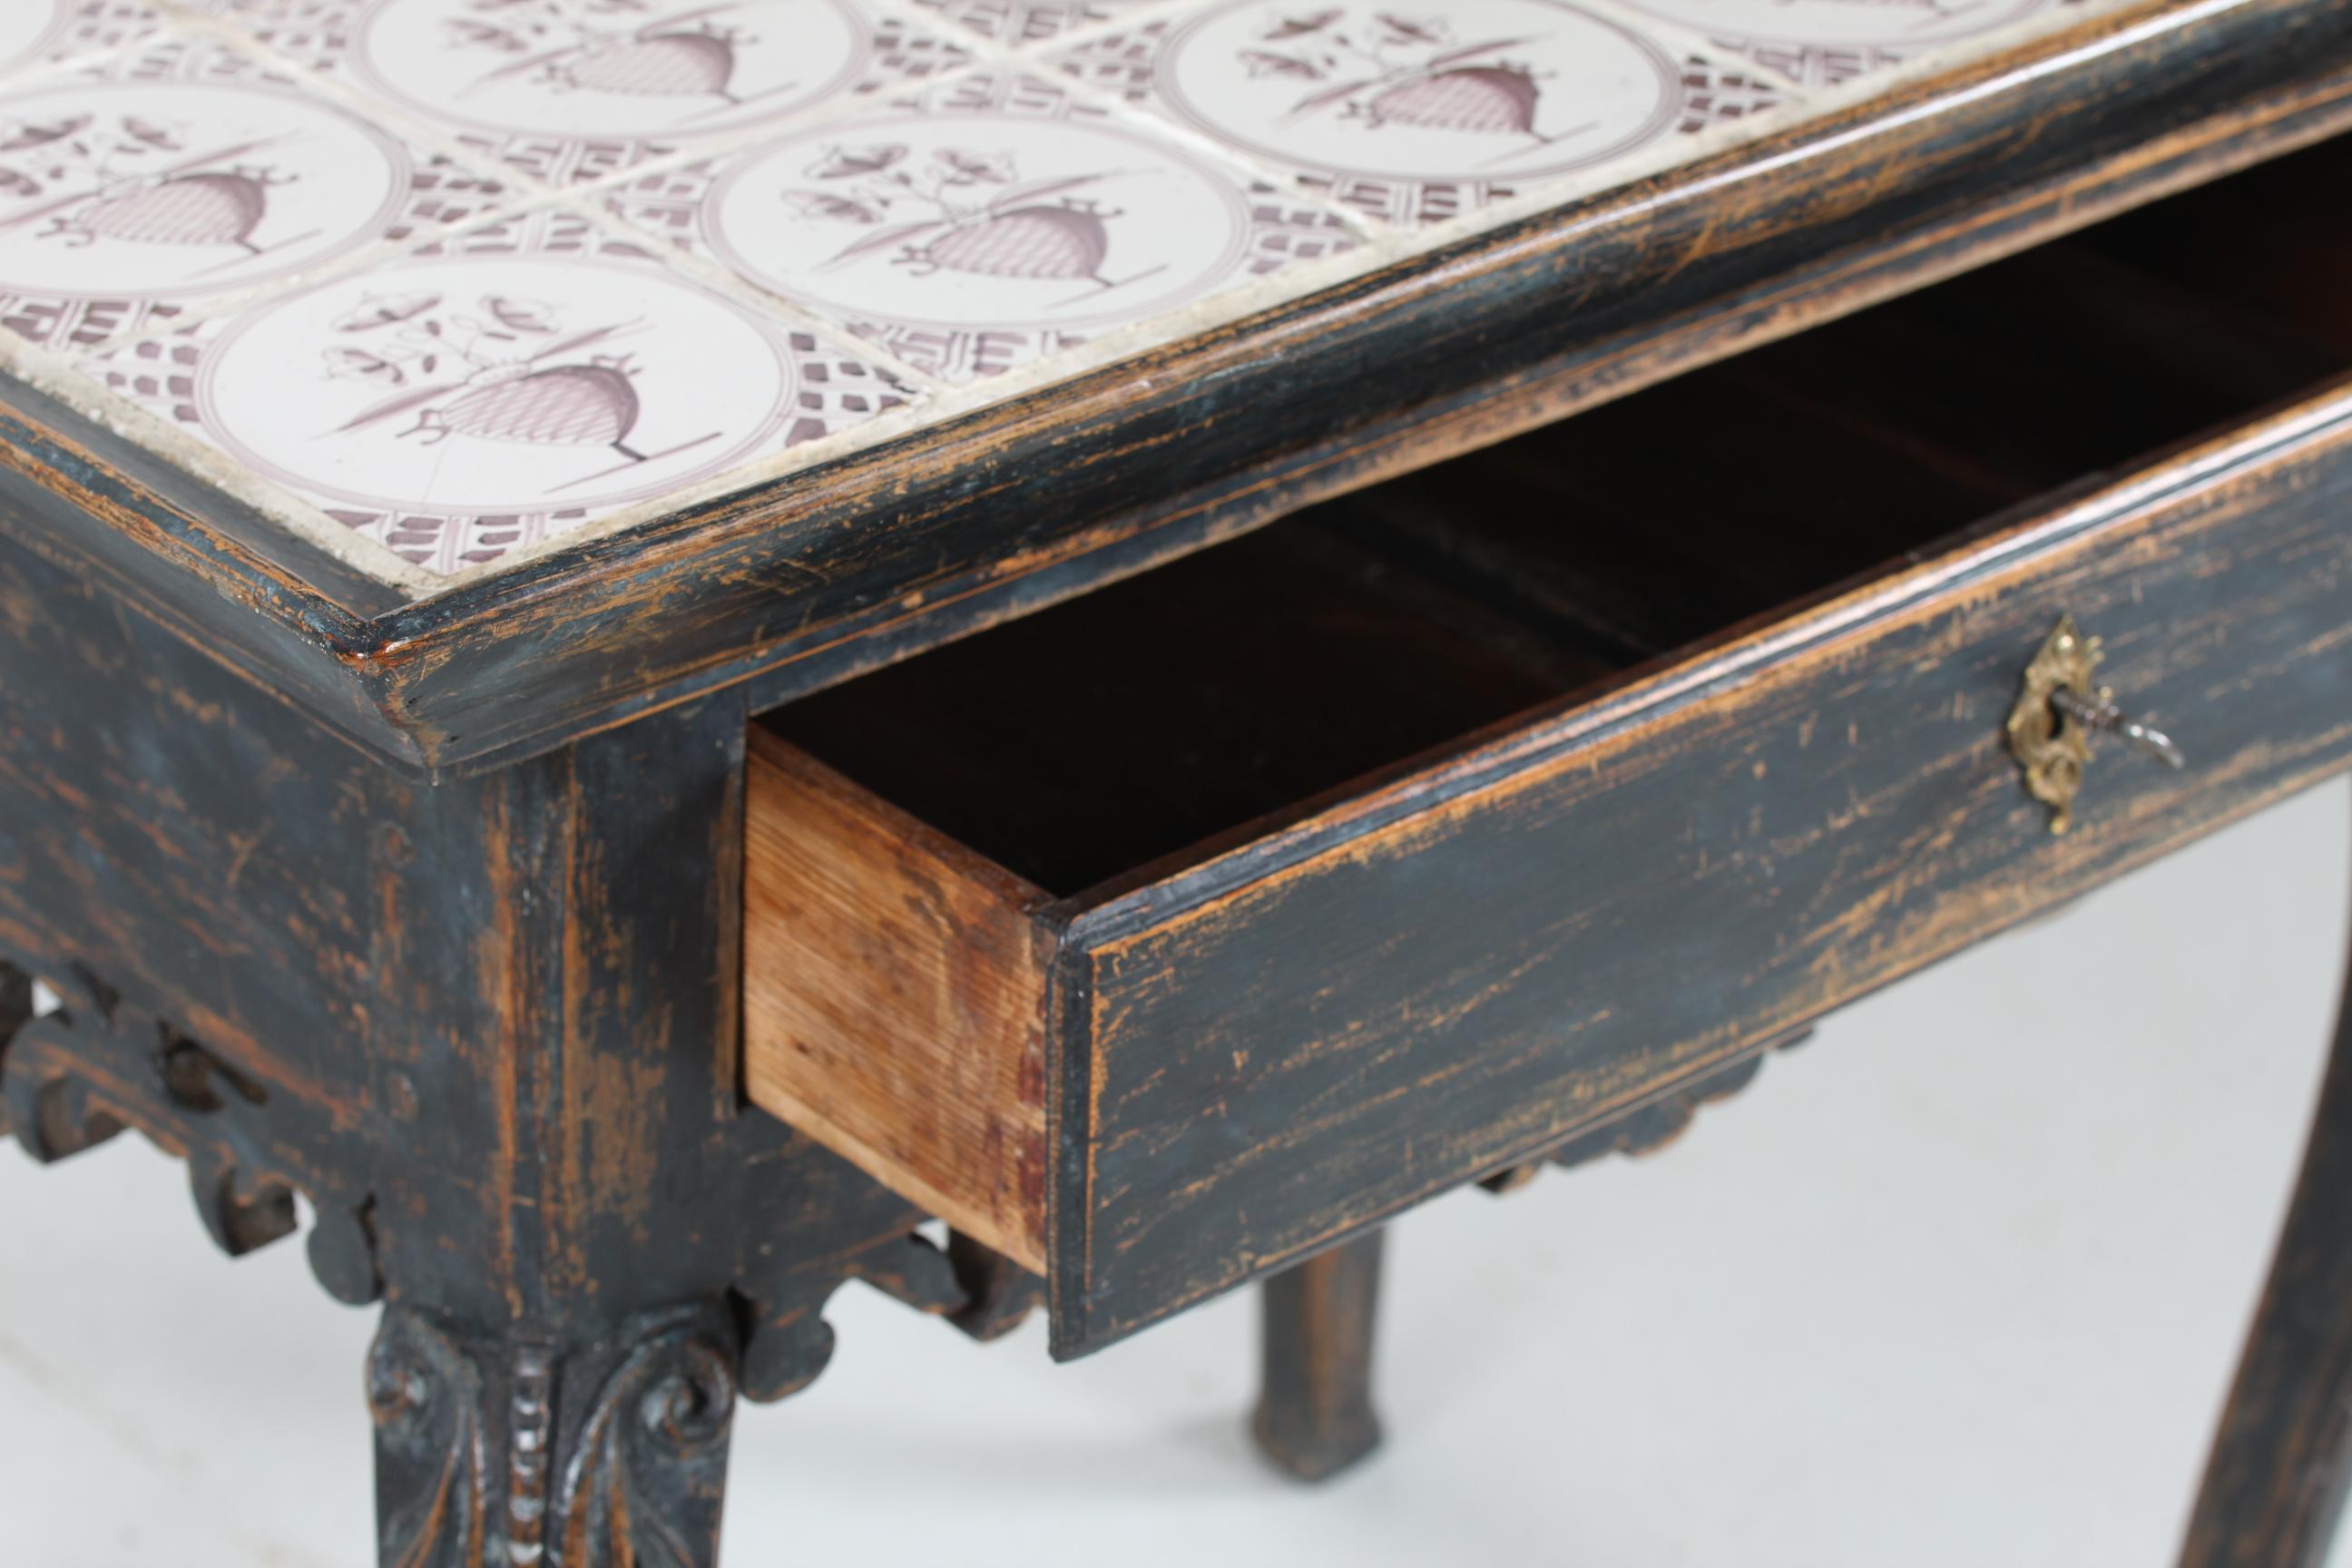 Danish or Swedish Rococo table with drawer with hand carved ormaments on the legs
It's made of solid wood with dark blue/green paint with patina.
The Tiles on the top are made in Holland and hand painted in 19th century.